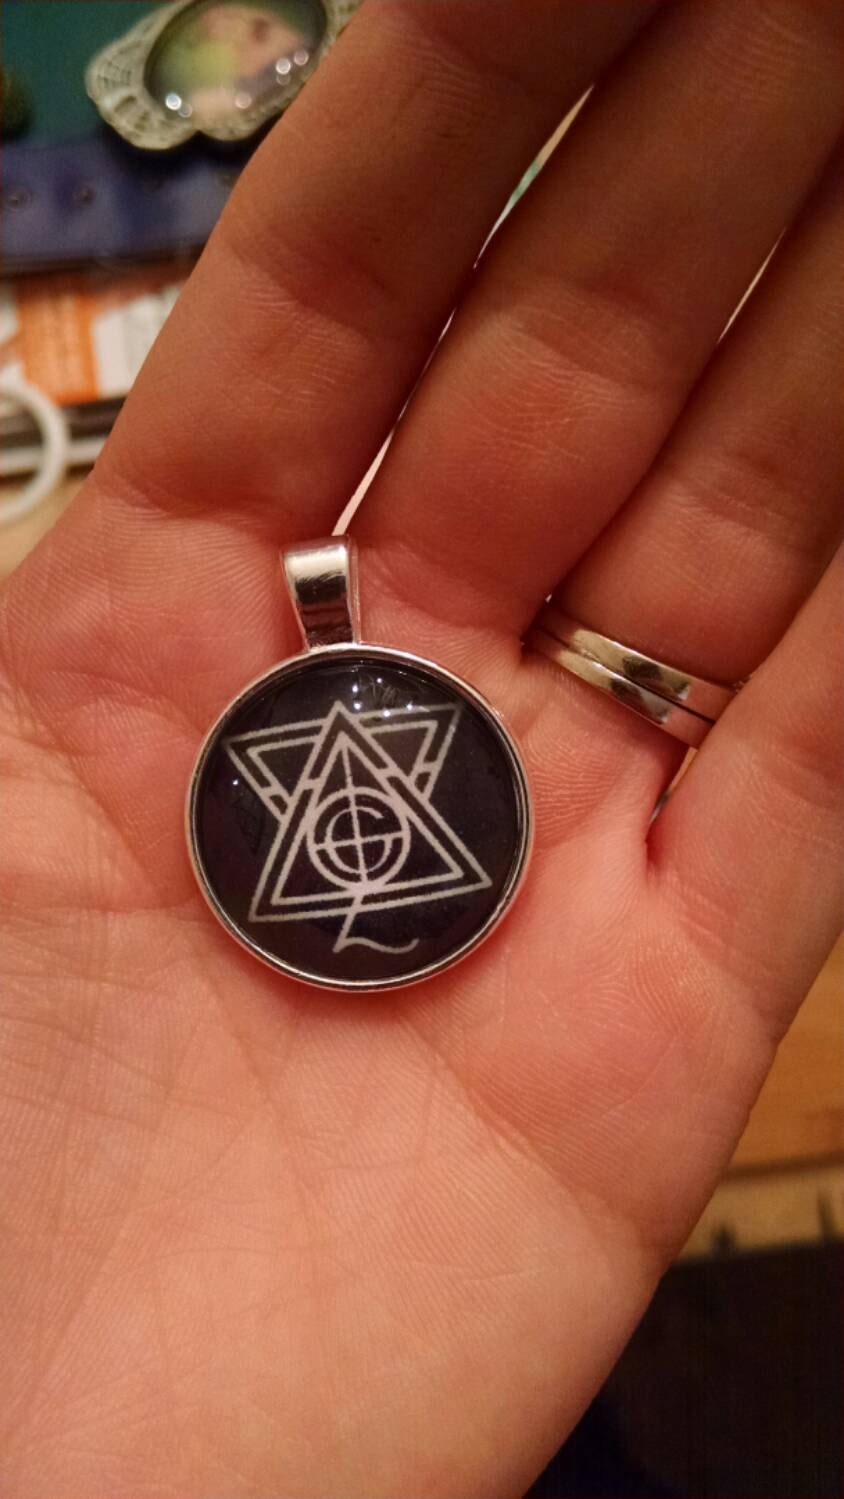 Ghost band member symbols pendant by demdolly on Etsy